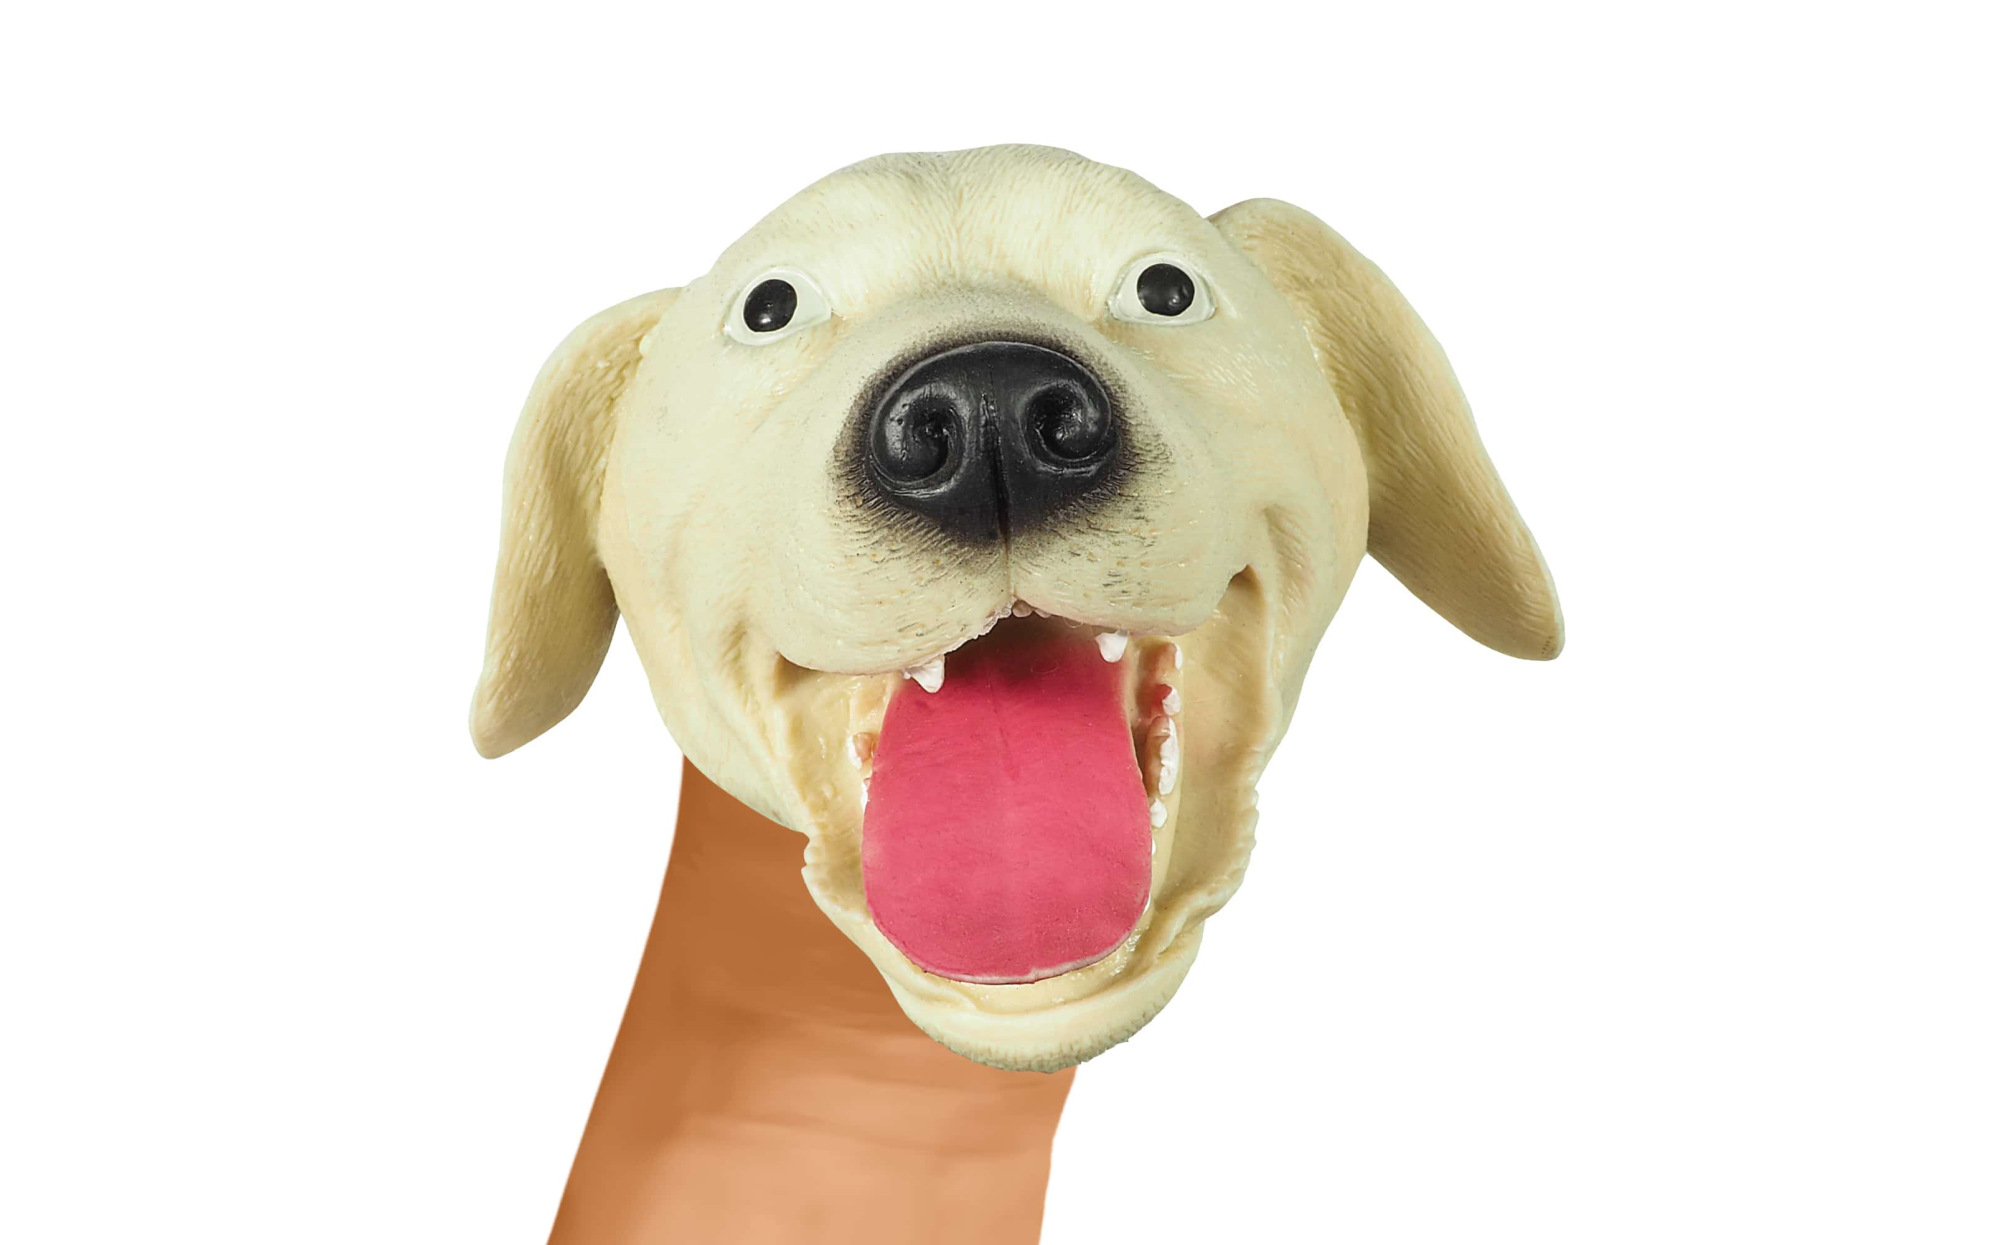 Details about   STRETCHY DOG HAND PUPPET DGHP SOFT GLOVE PUPPY HEAD PET CANINE CUTE FRIEND 